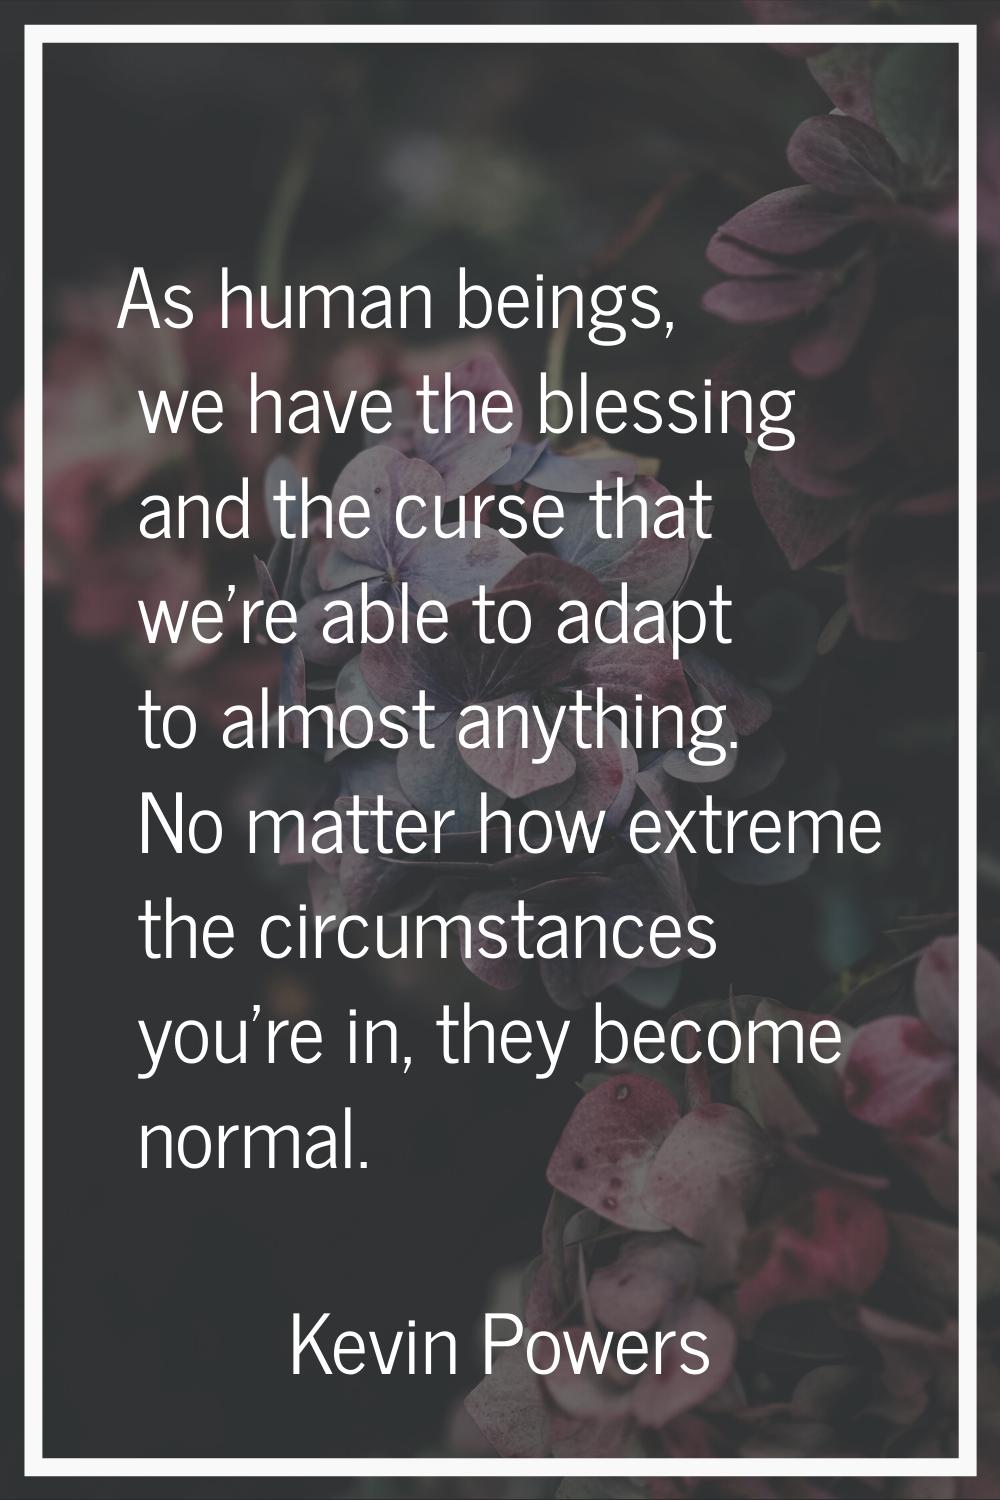 As human beings, we have the blessing and the curse that we're able to adapt to almost anything. No